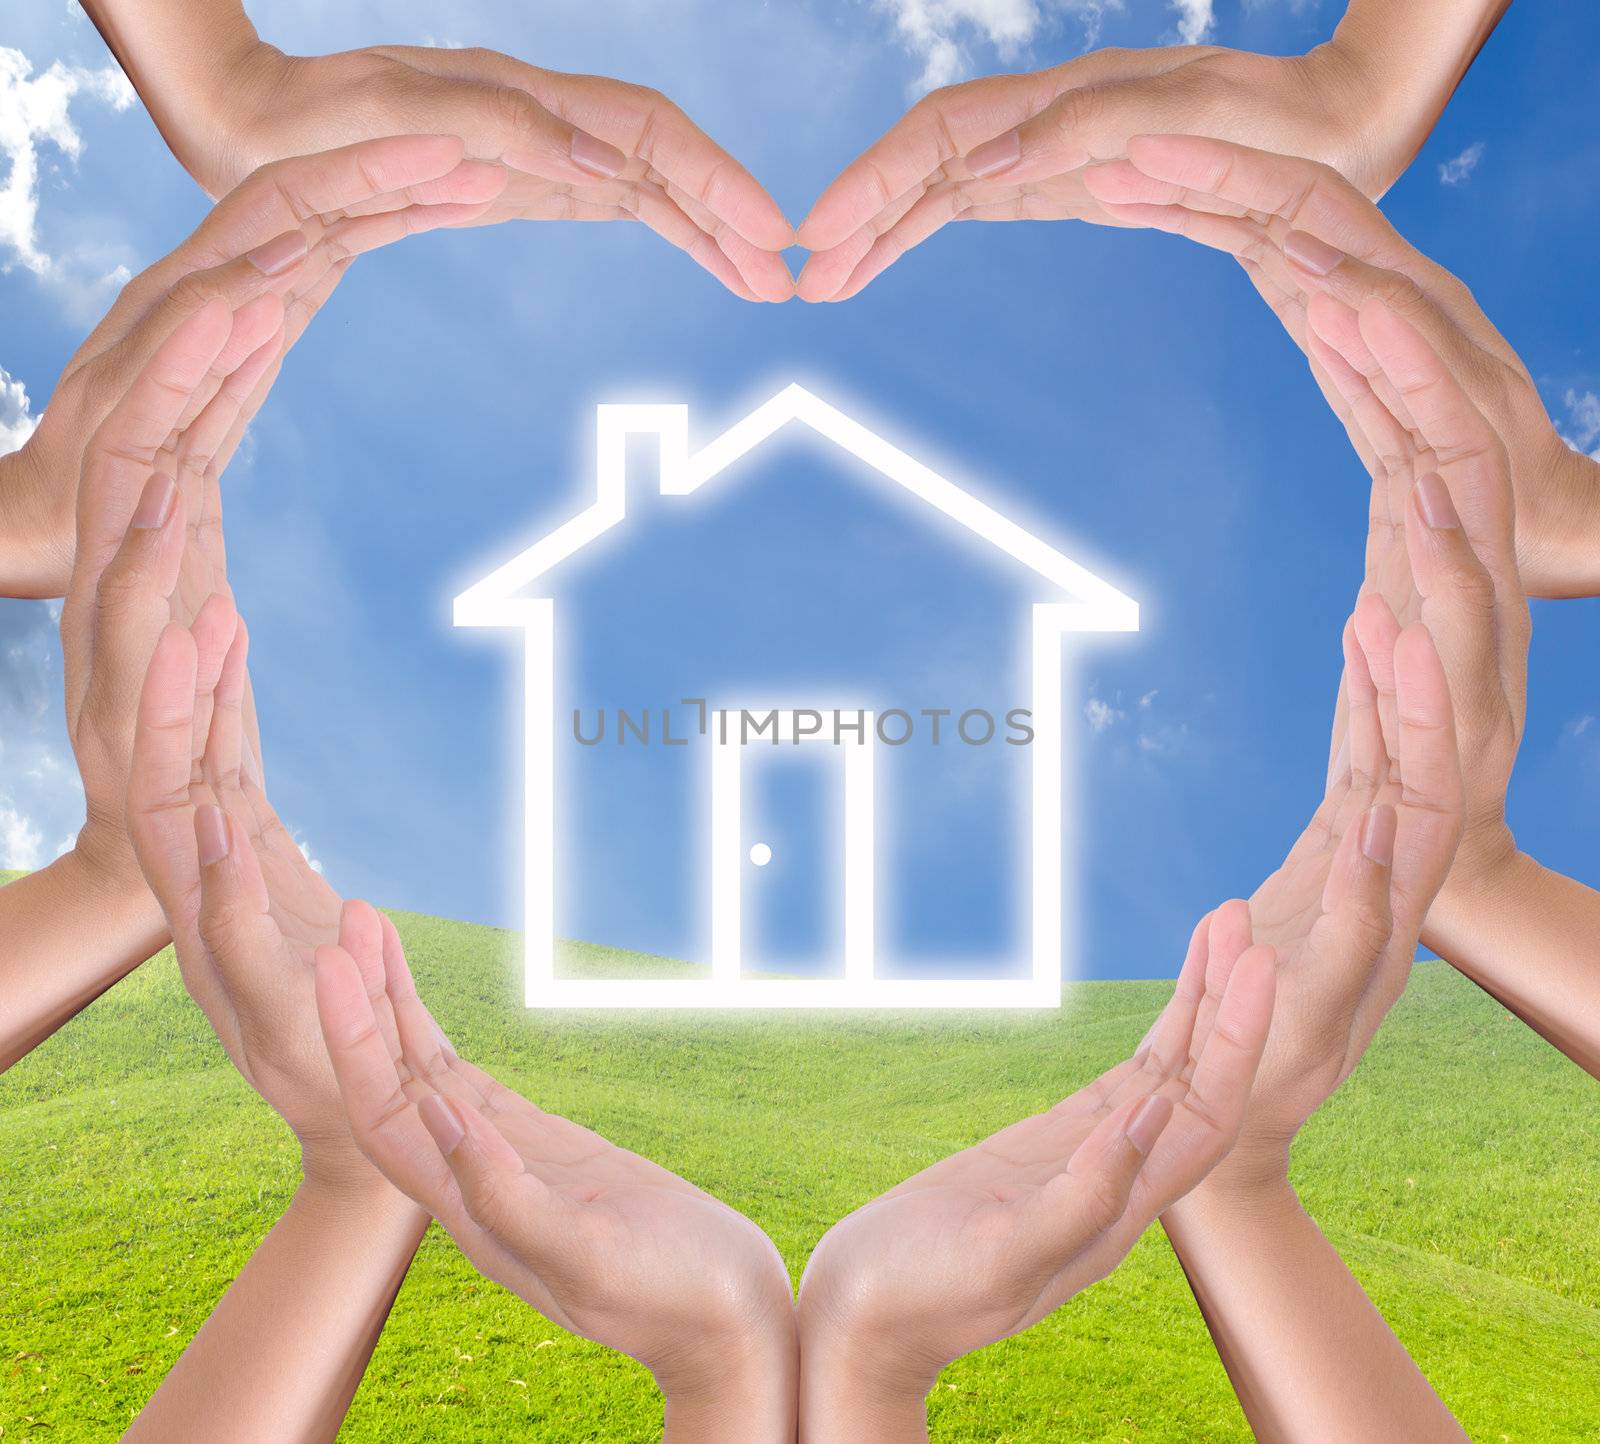 house icon in hands heart